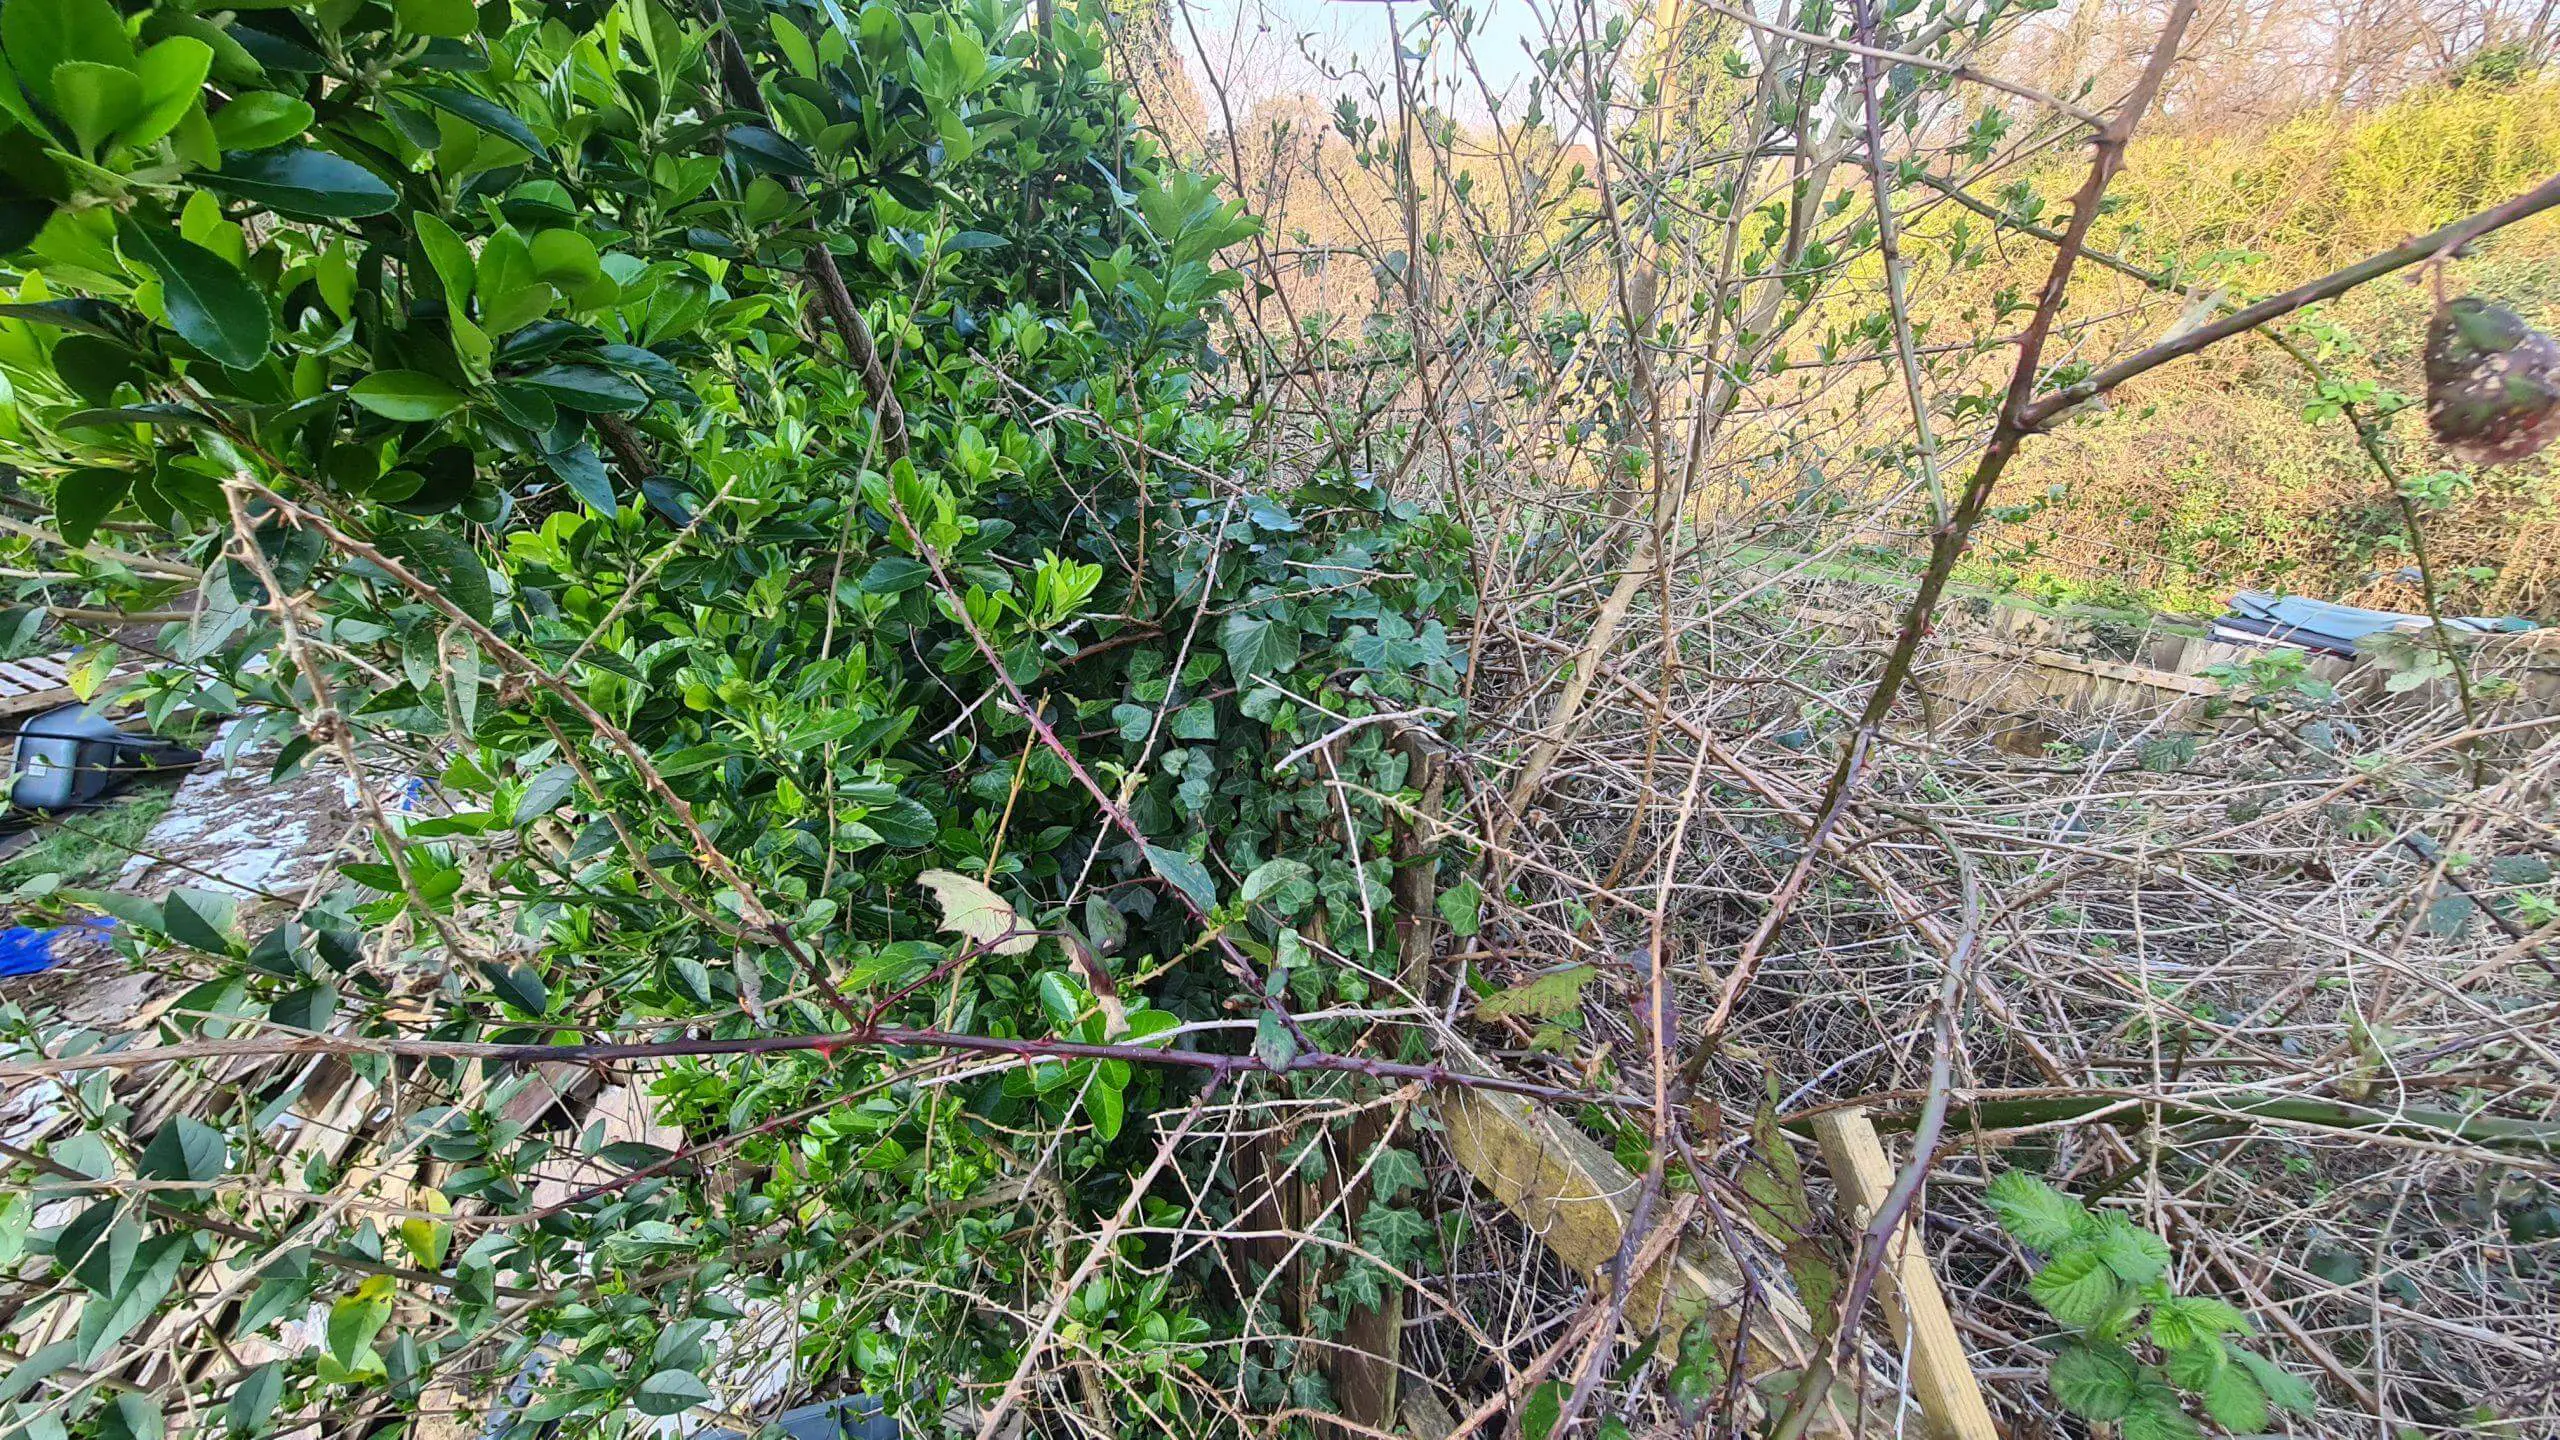 Invasive weeds growing over a neighbours boundary and infesting the next property